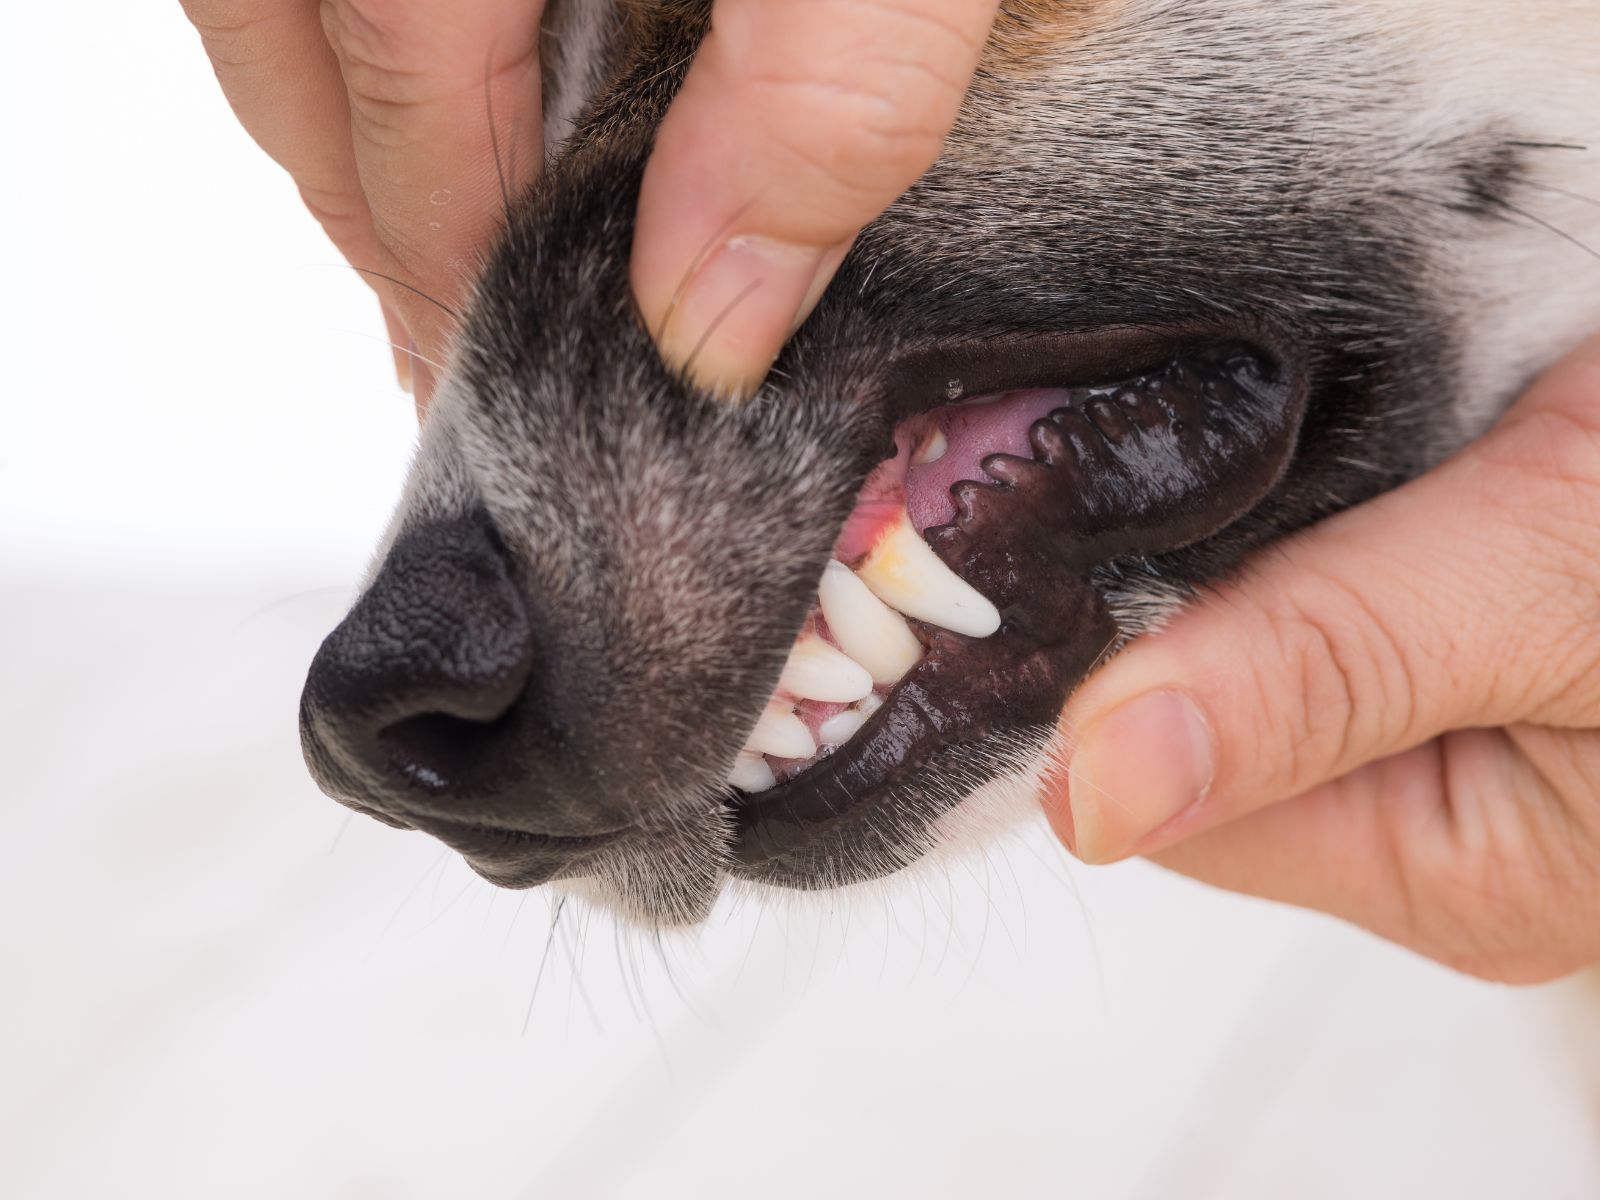 a person's hand touching a dog's teeth